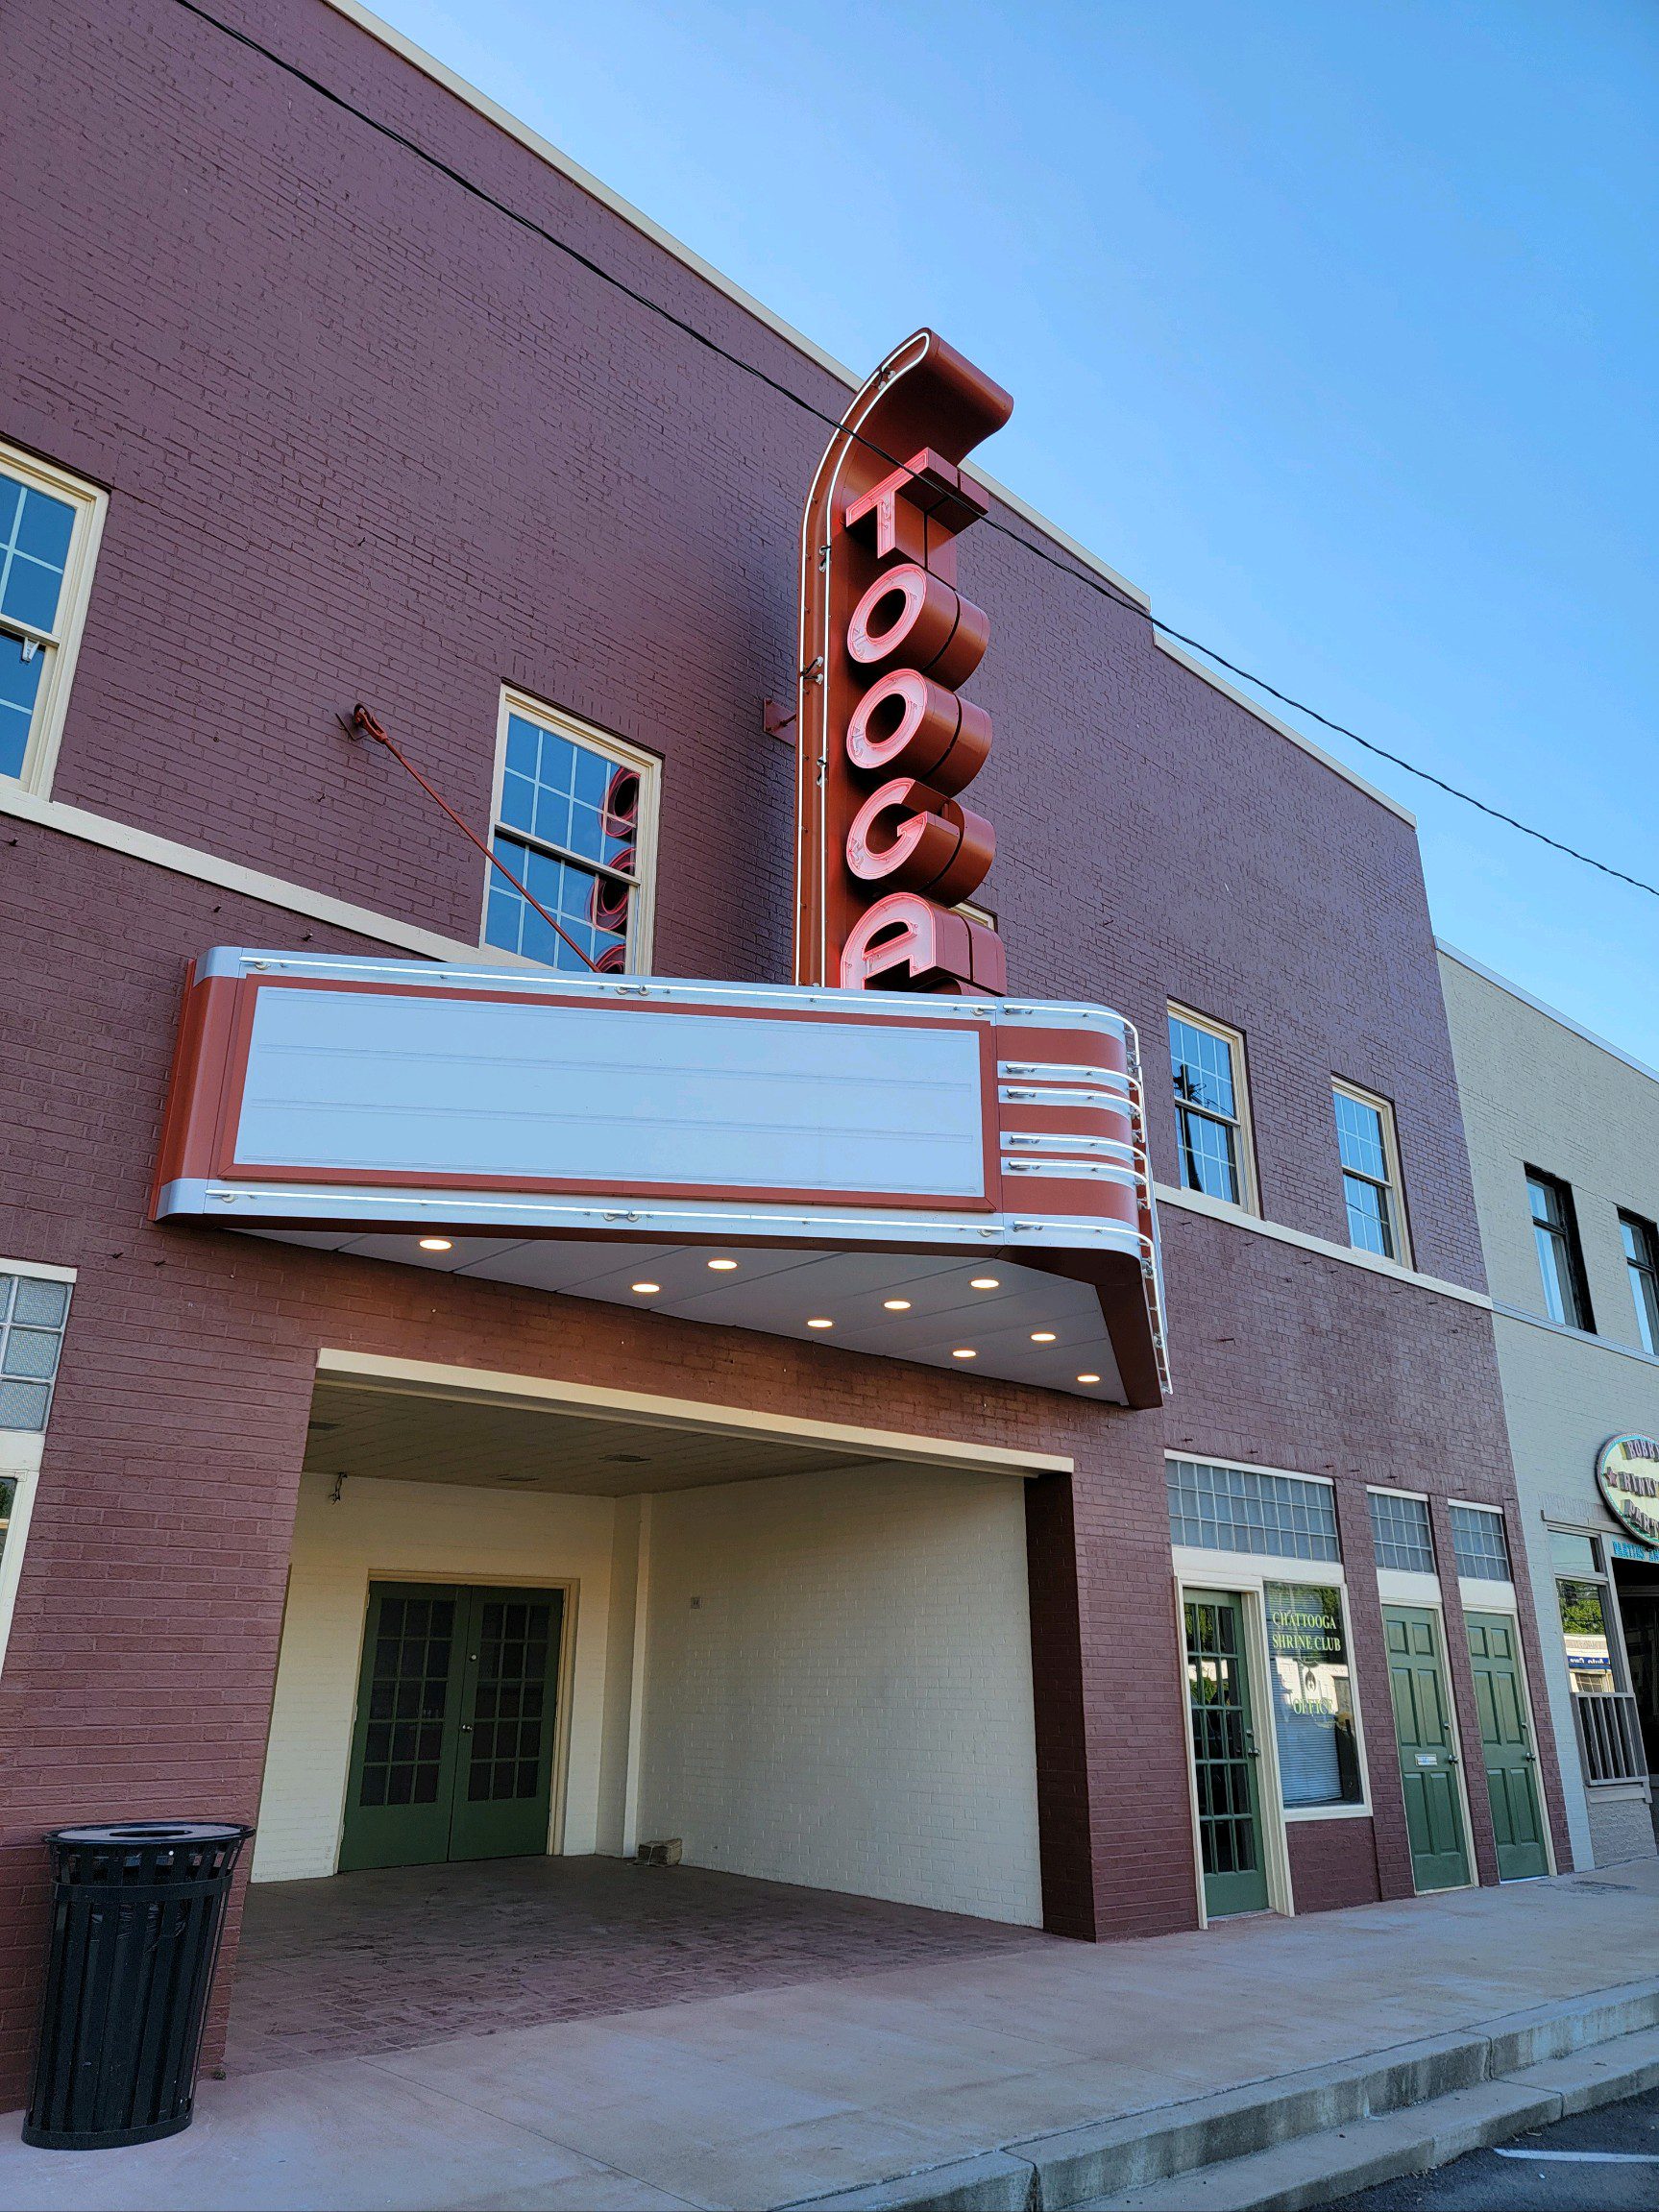 Tooga Theatre LED sign by Wagner Electric Co.